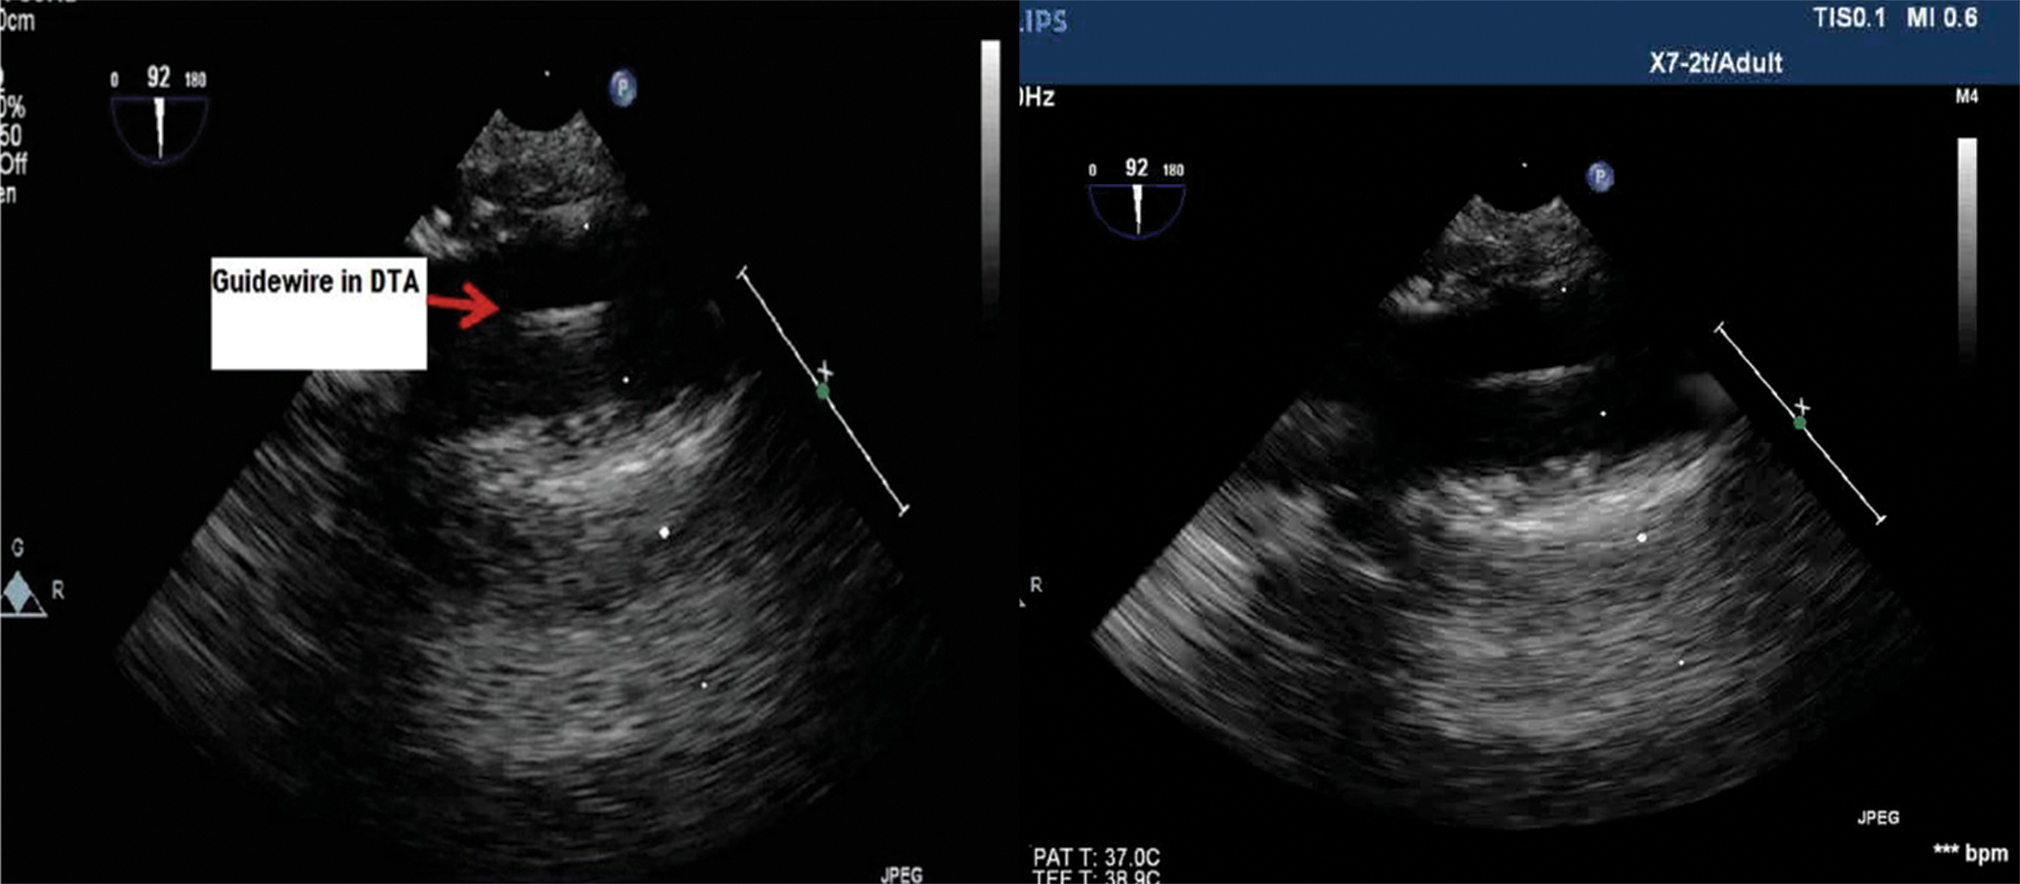 Transesophageal echocardiography (TEE)upper esophageal long axis view showing femoral artery cannulation with the guidewire being visualized the descending aorta.